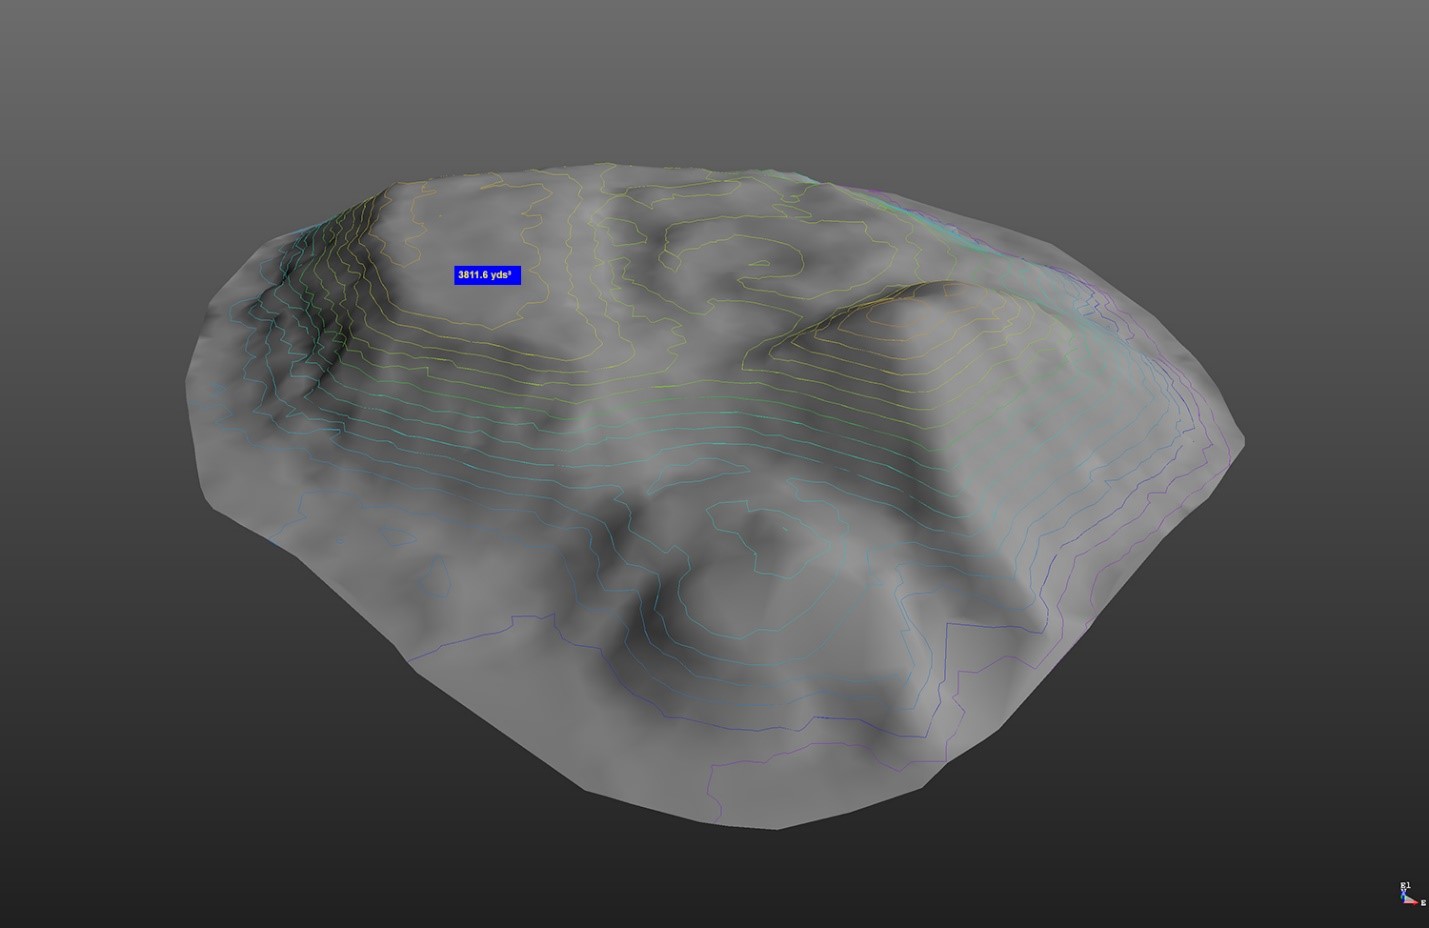   Topographic lines generated on 3d model of Silica sand.  